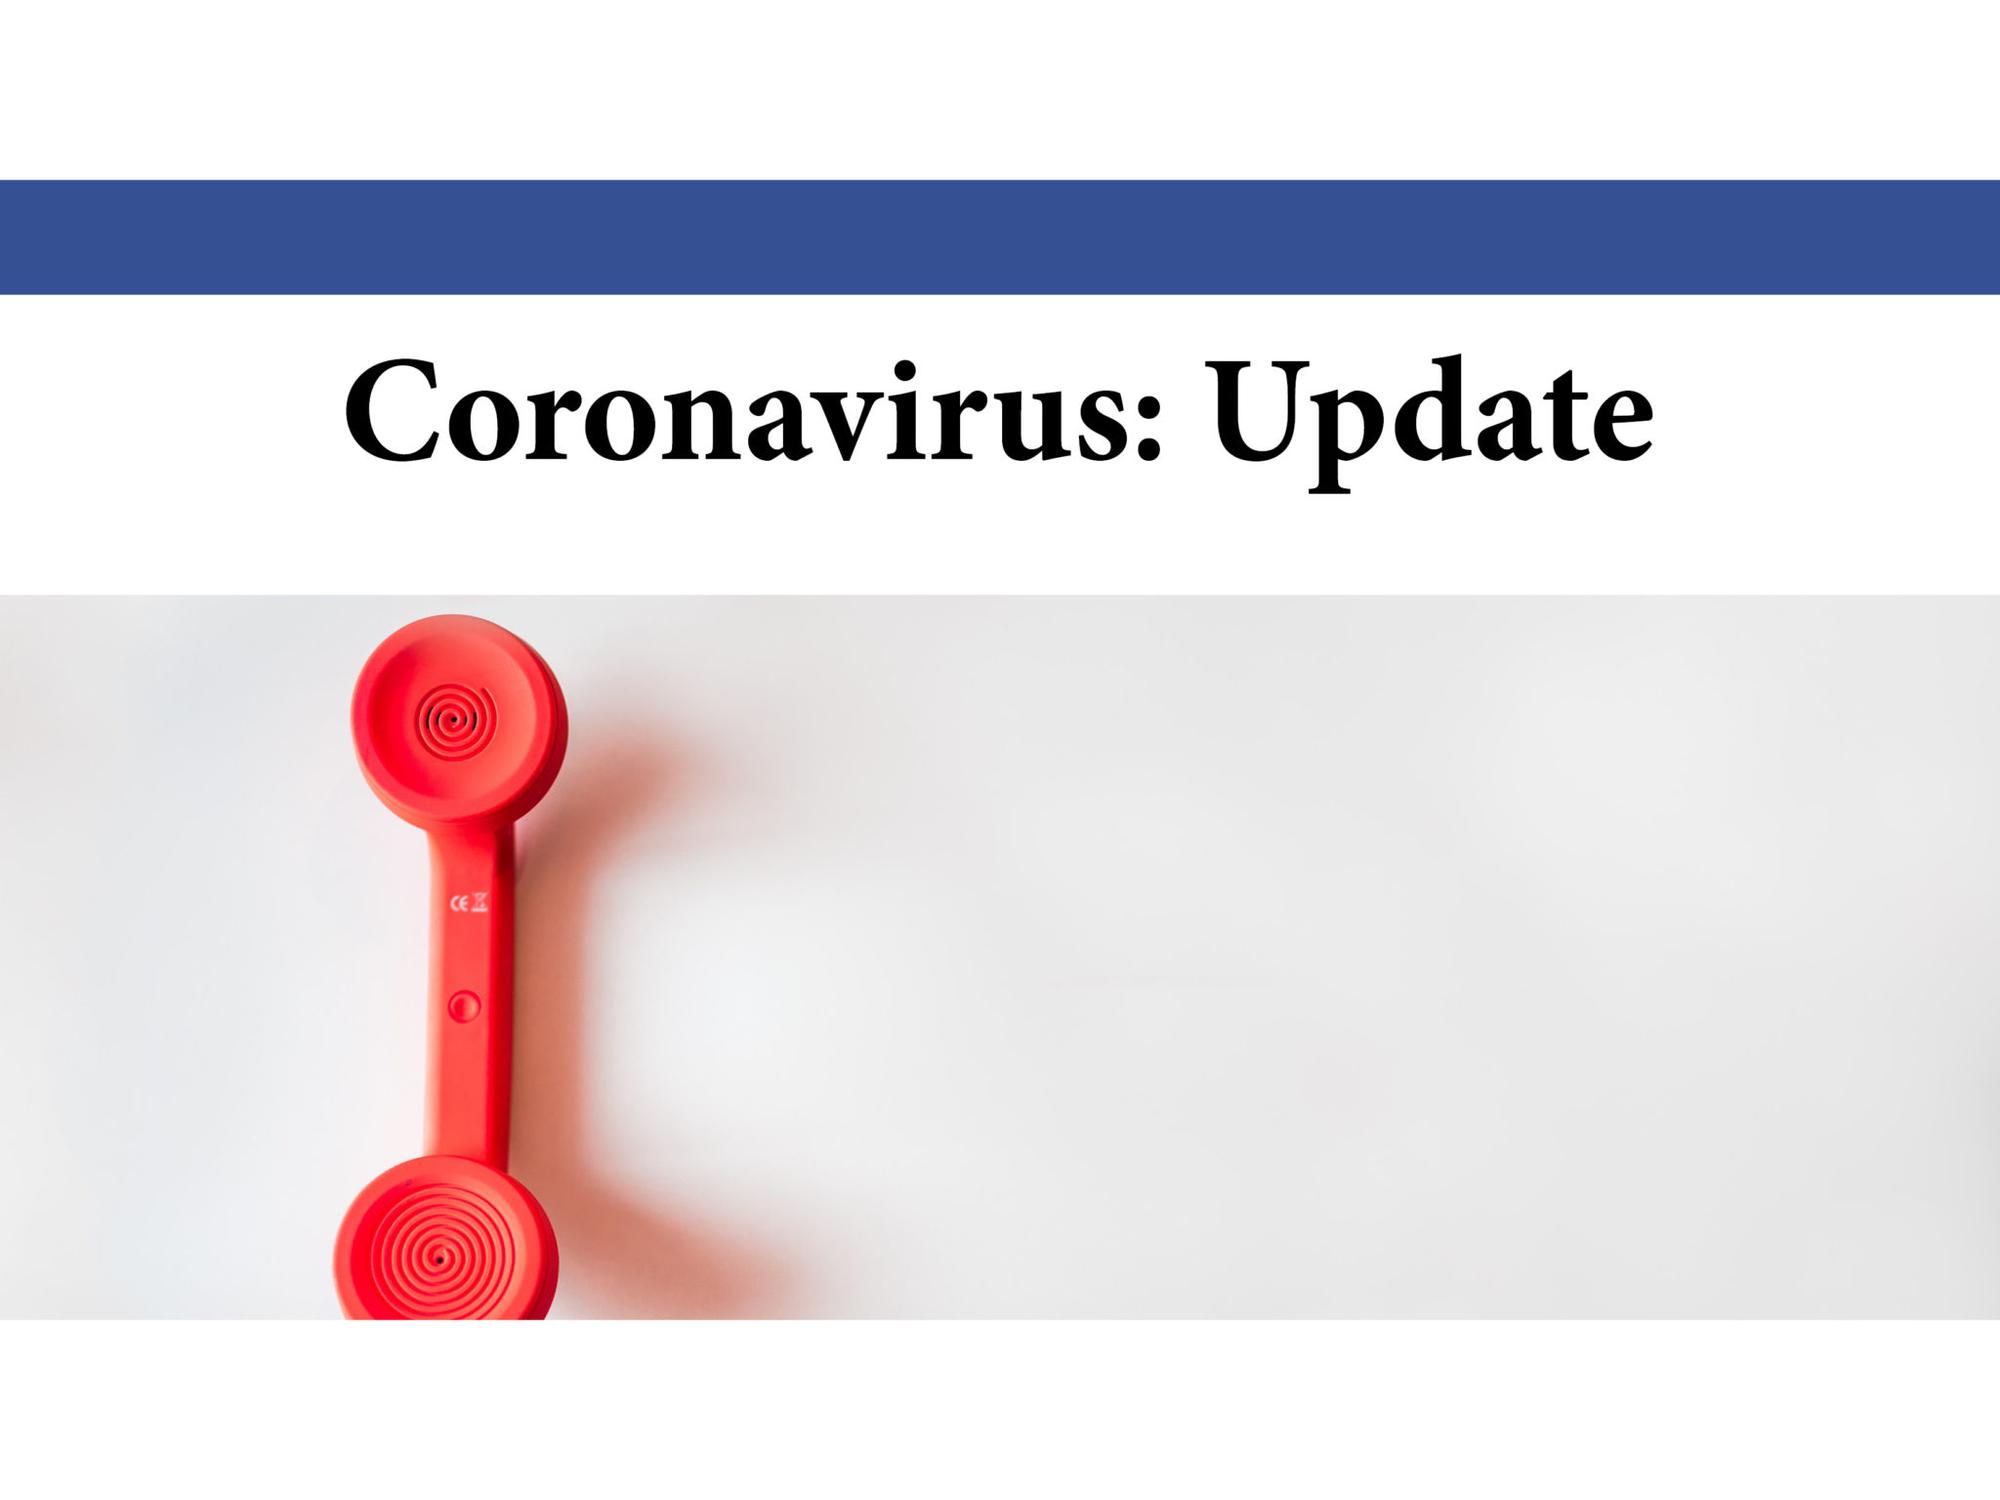 44 confirmed cases of COVID-19 in EOHU on Monday